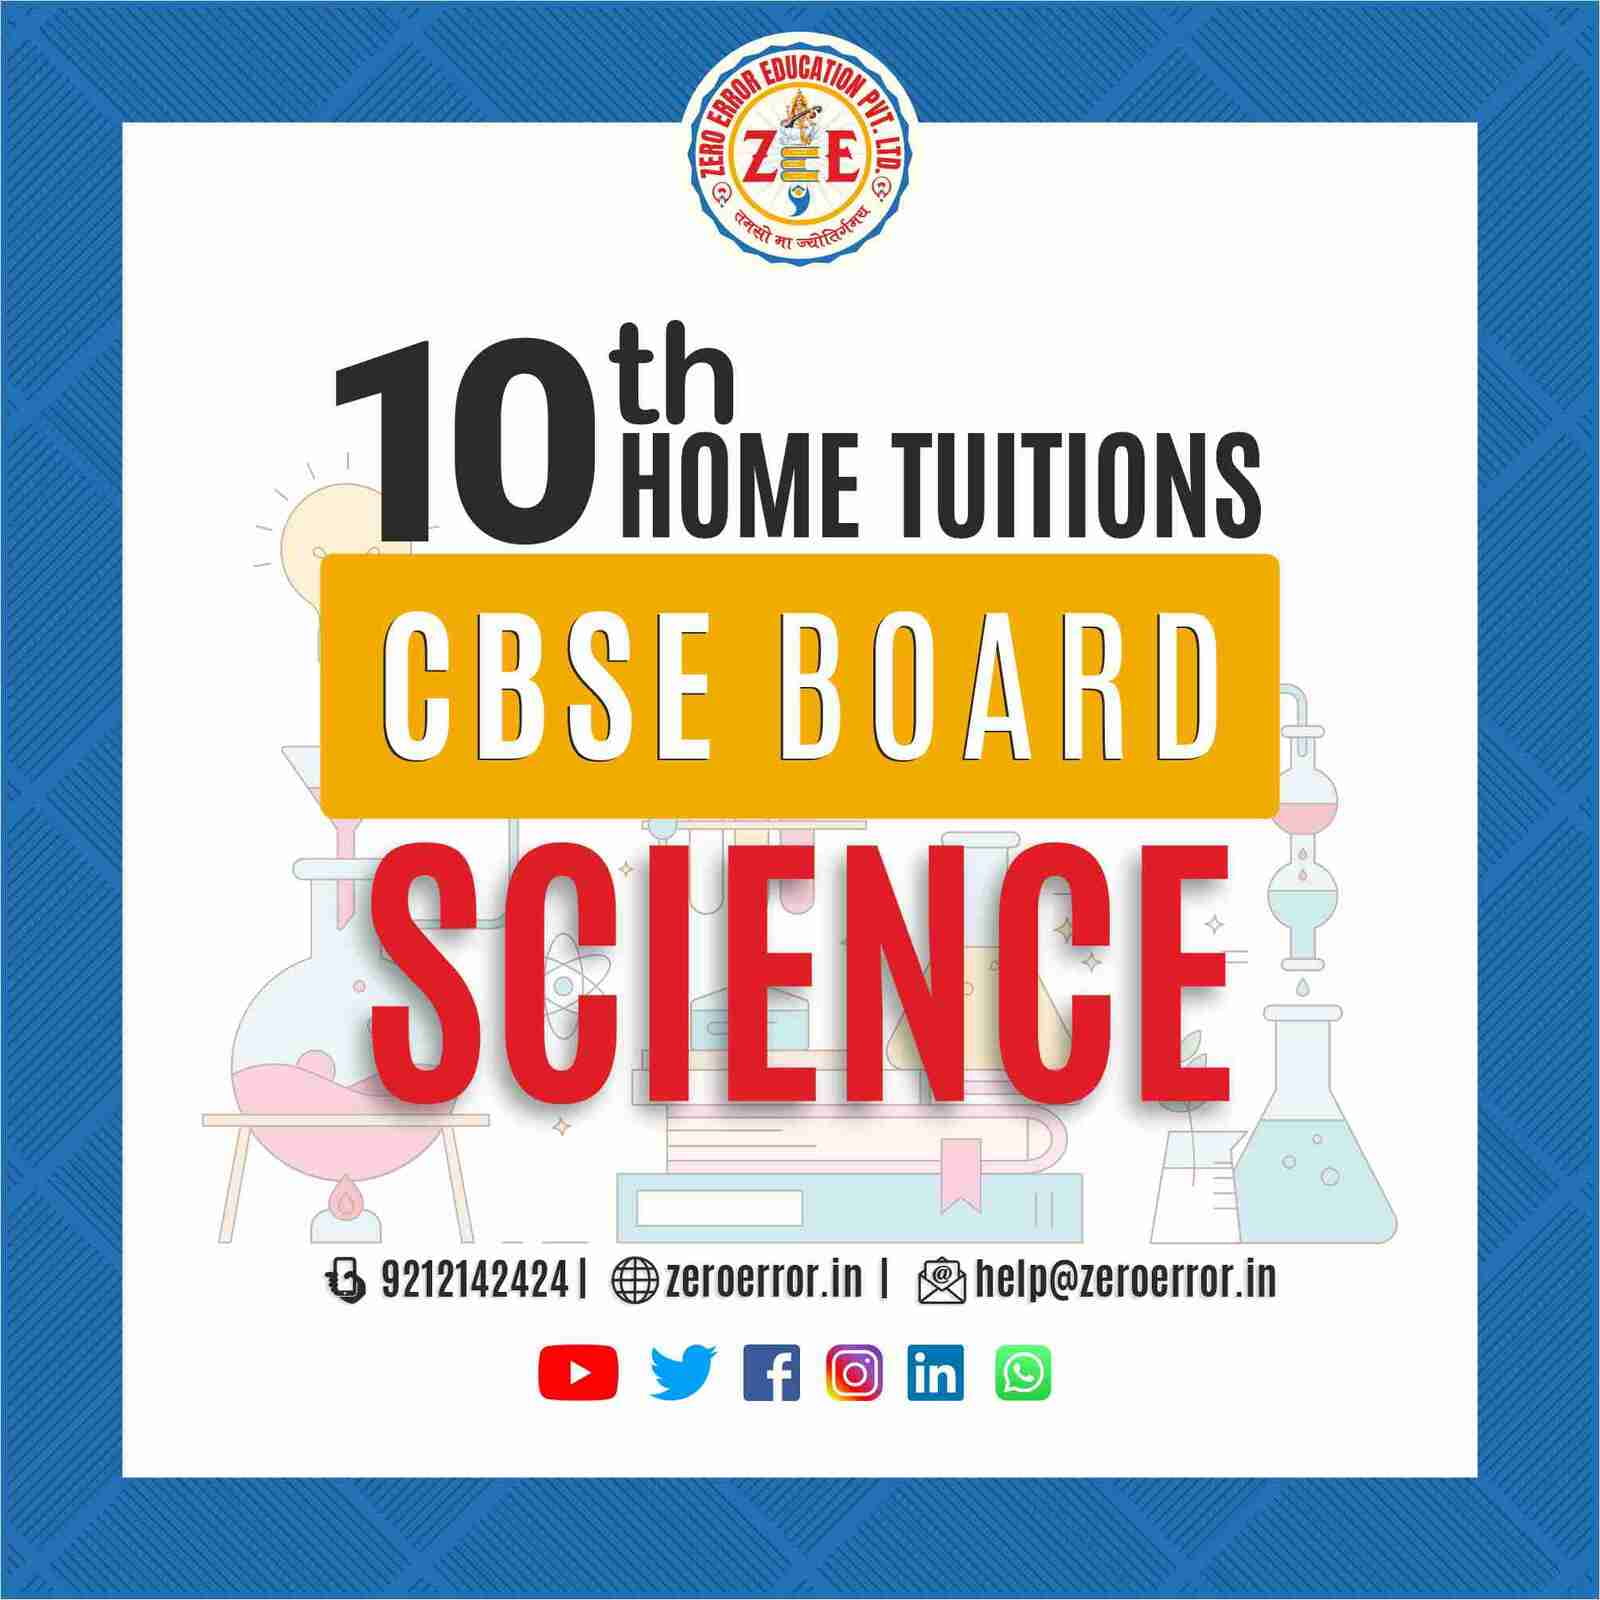 10th Grade CBSE Science Online Classes by Zero Error Education Prepare for your CBSE board exams with online and offline Science classes for 10th grade. Learn from experienced home tutors and get all the help you need to succeed. Enroll today at Zero Error Education. [https://zeroerror.in/] Call 9212142424 for more information.